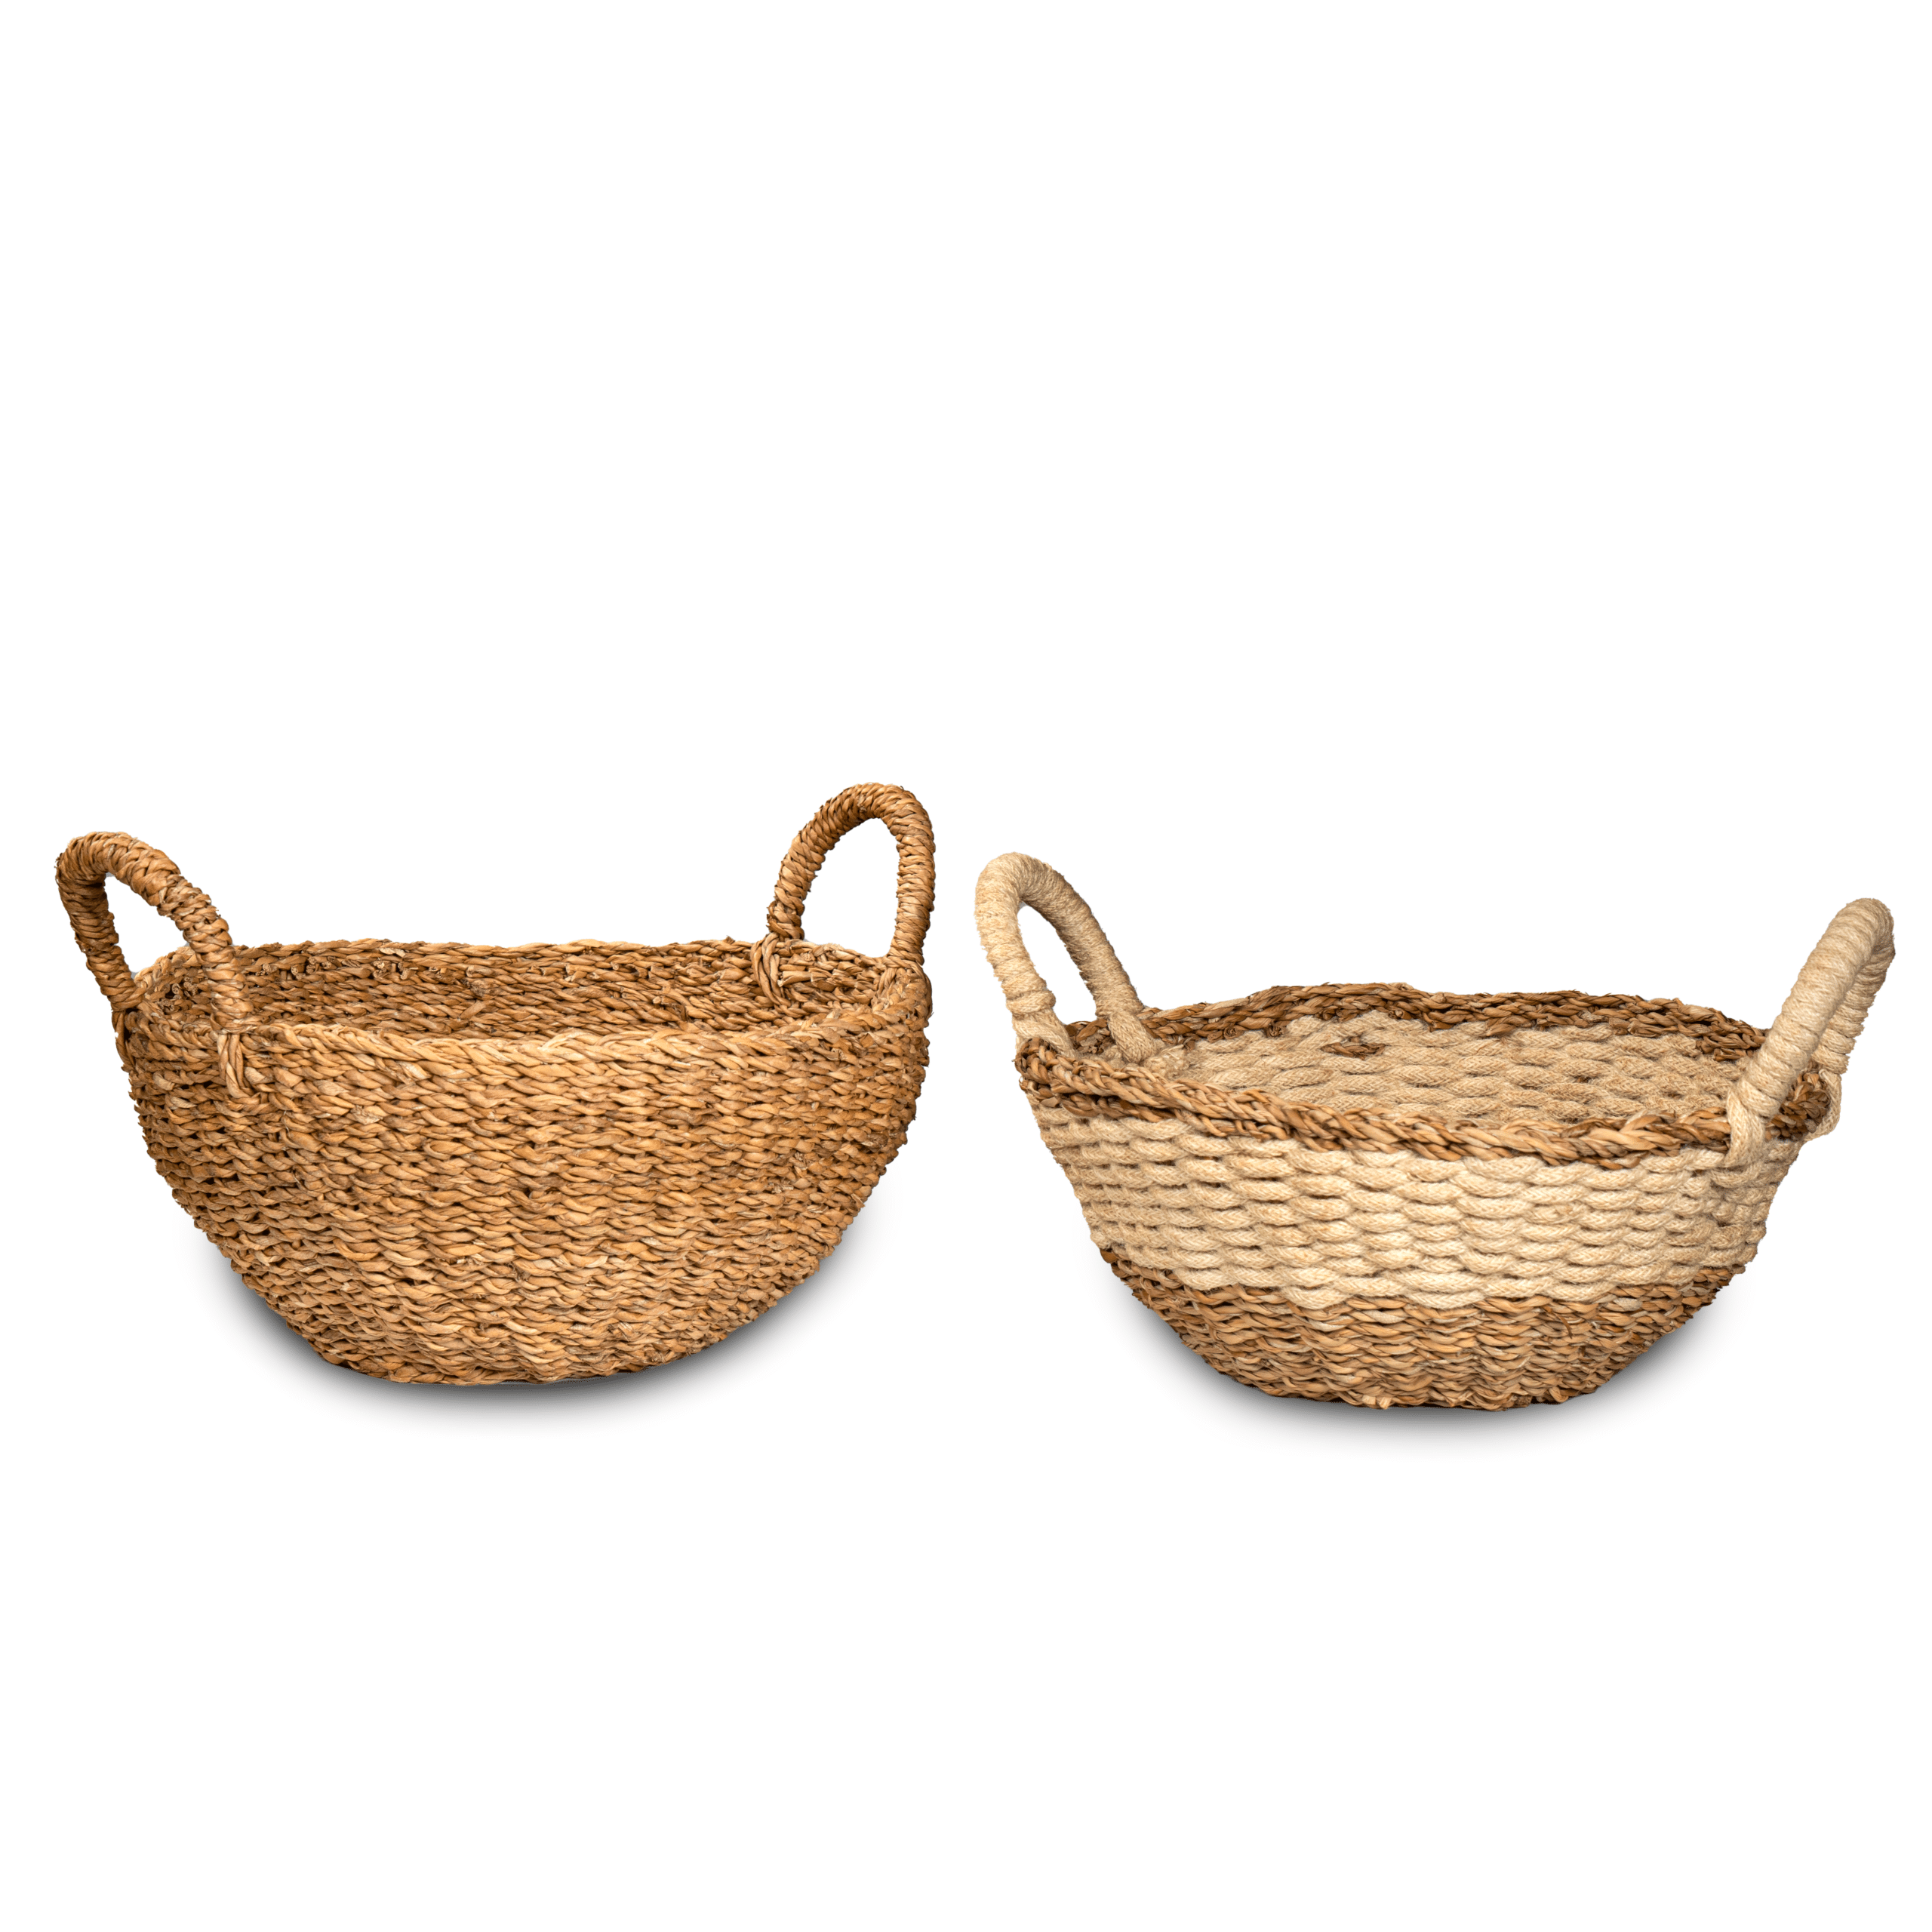 Tapered Seagrass Bowl Basket with Handles- ICSGHFB9 (3)